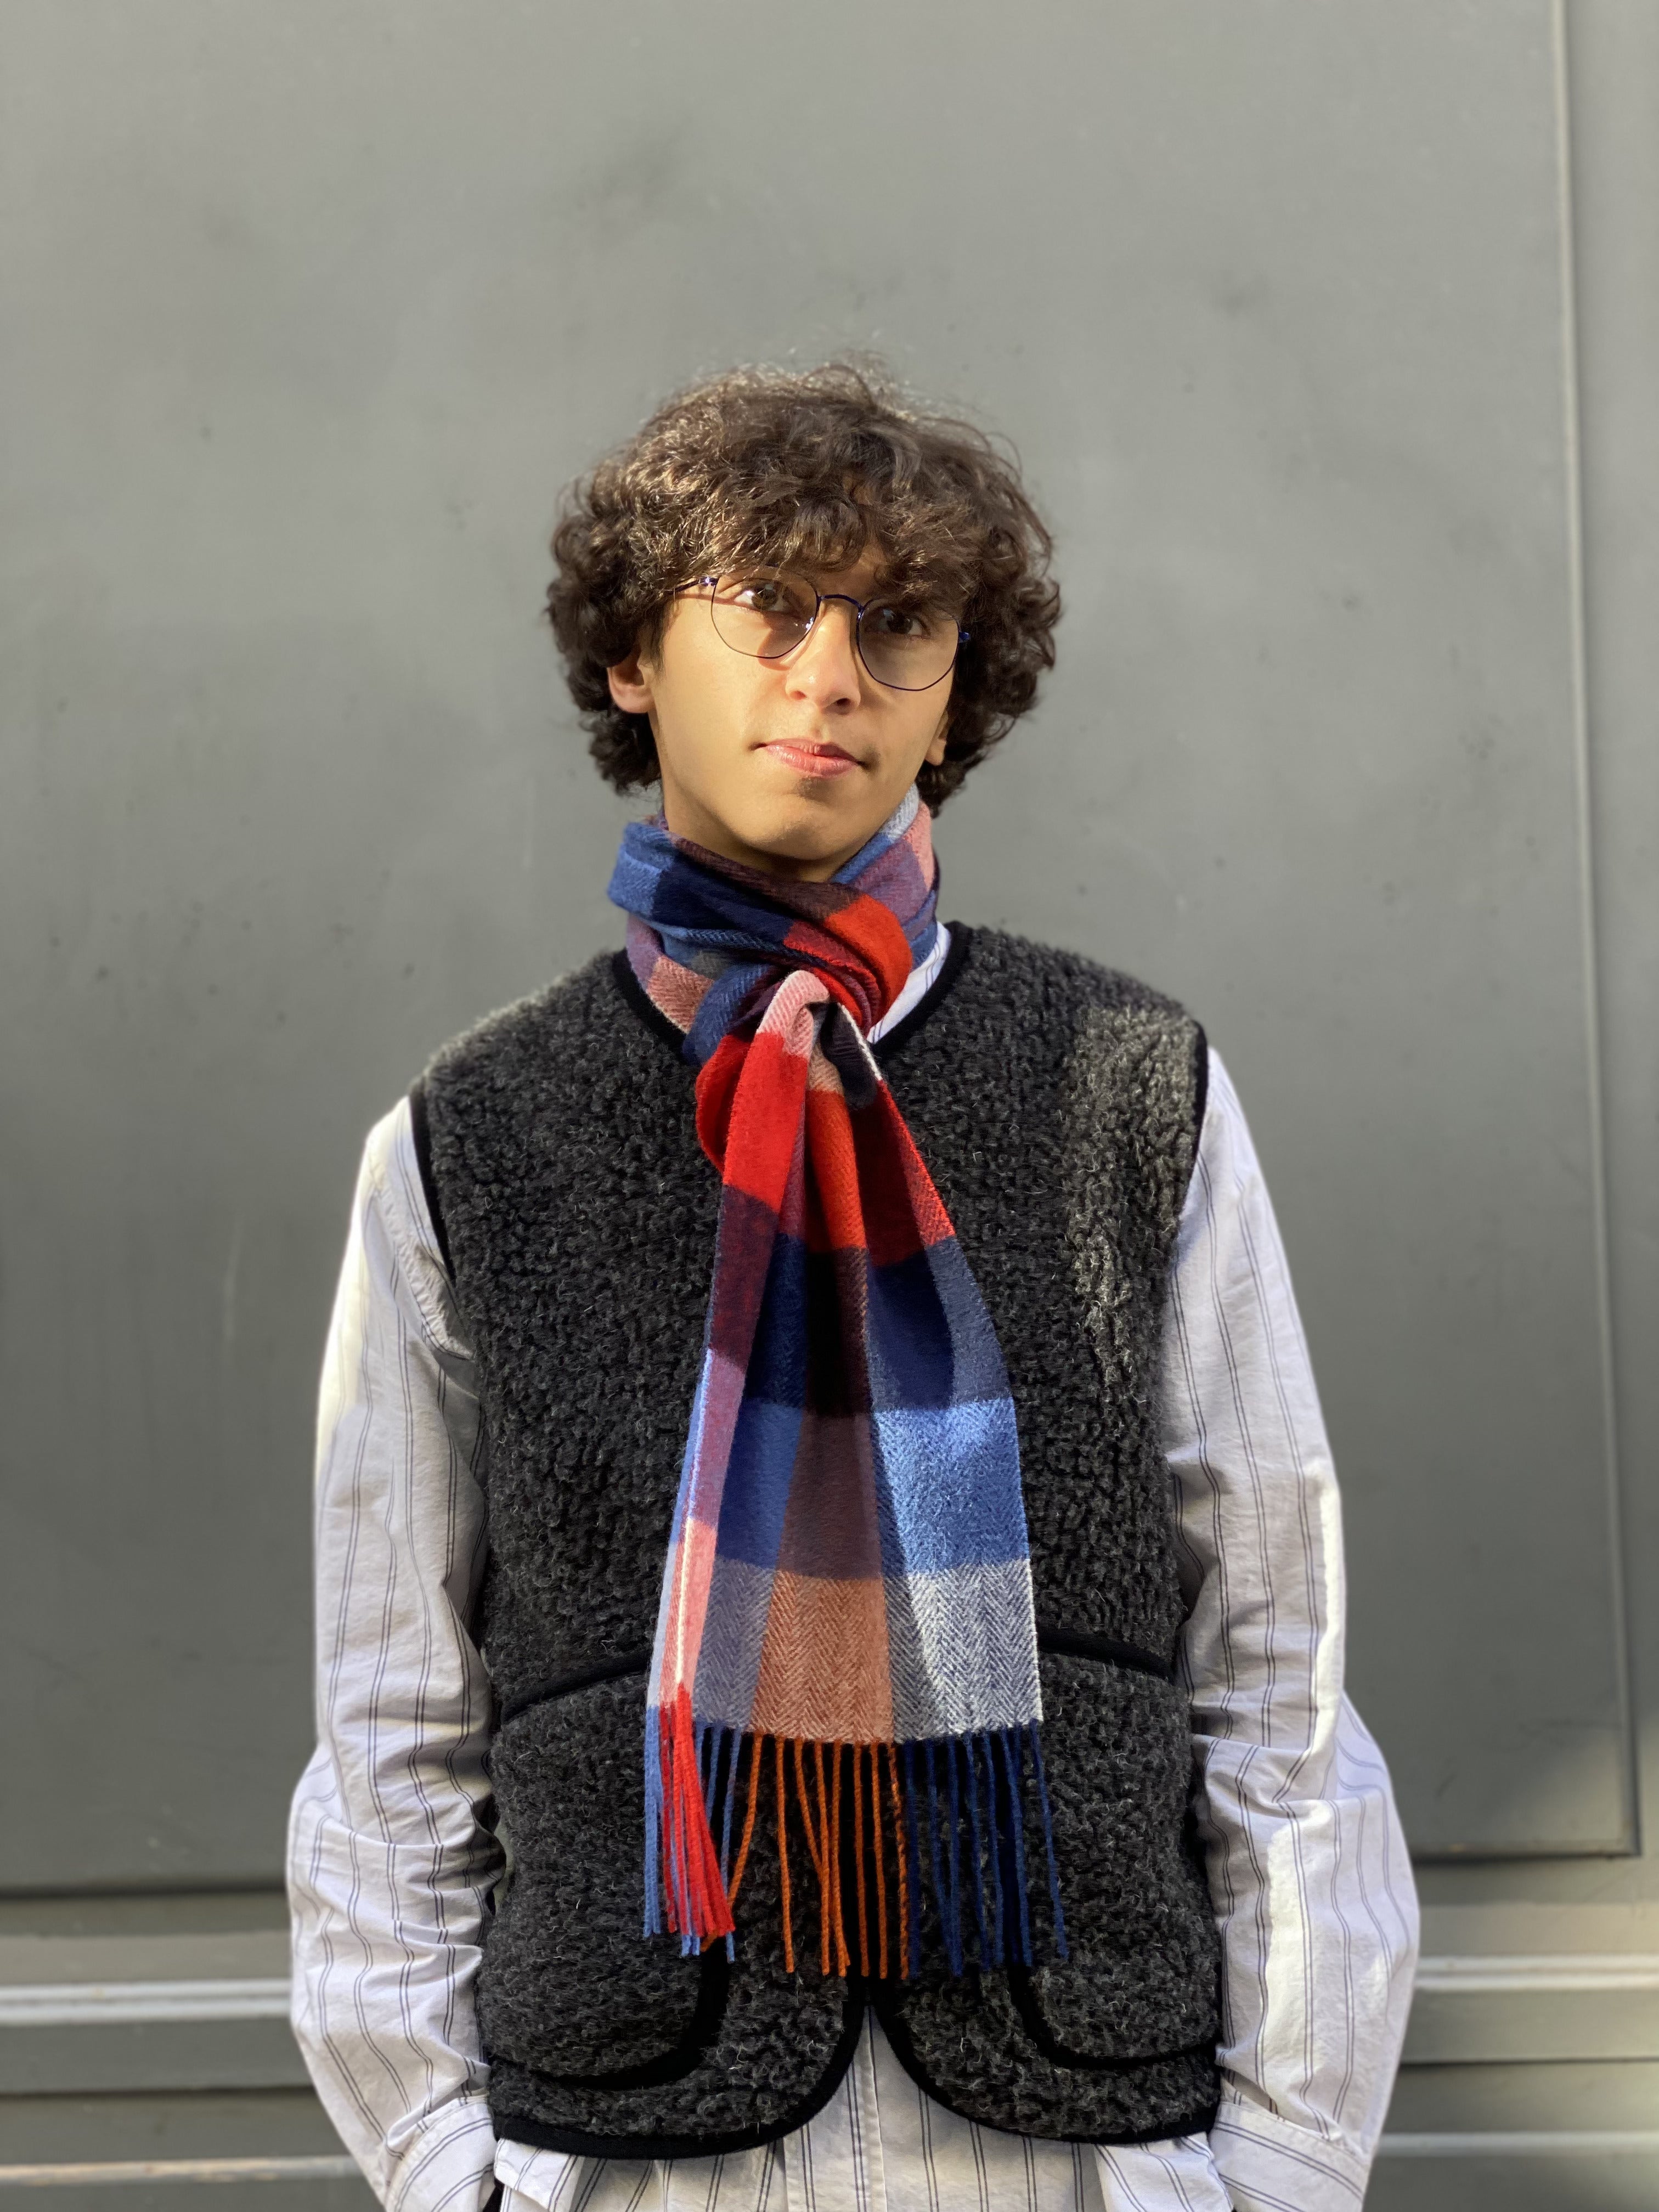 Alan Paine - Linton Wool Scarf (Blue Check)